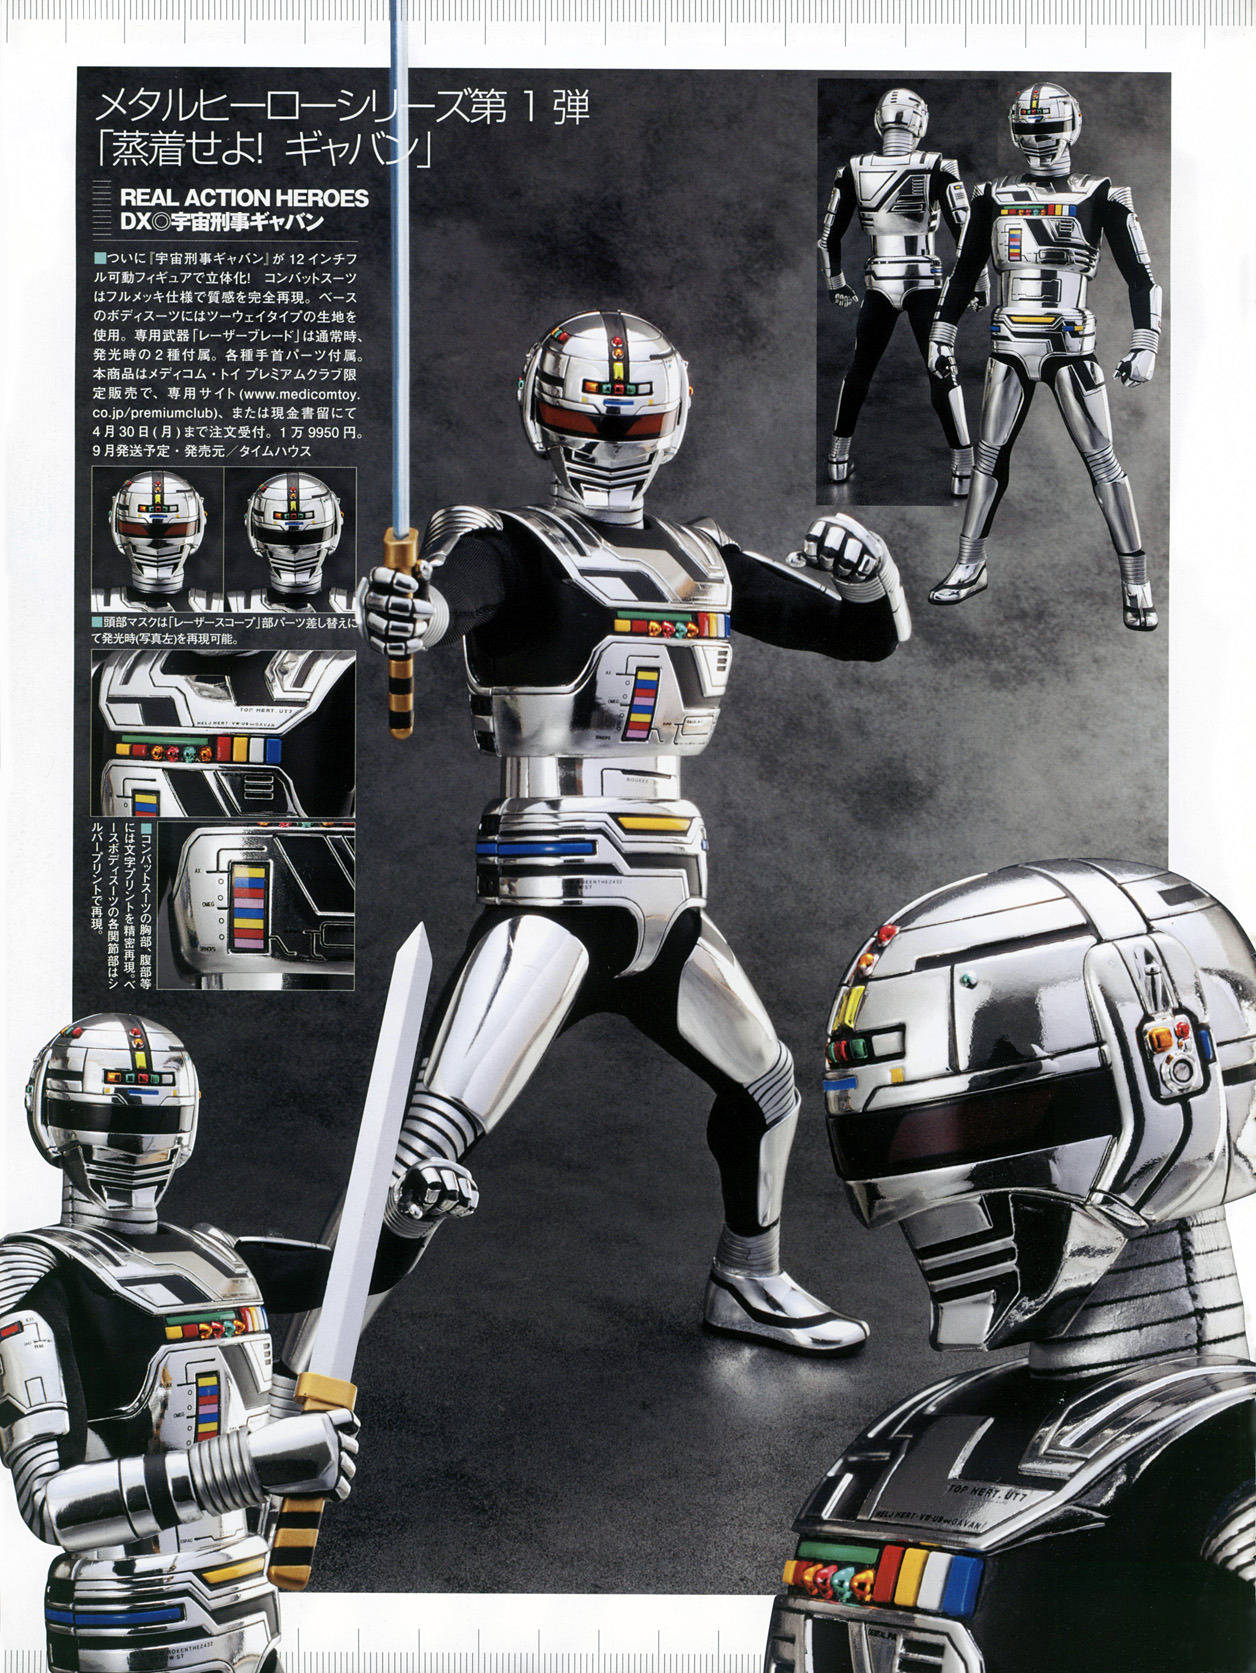 RAH DX Space Sheriff Gavan: No.2 New Wallpaper Size Scans from Magazines